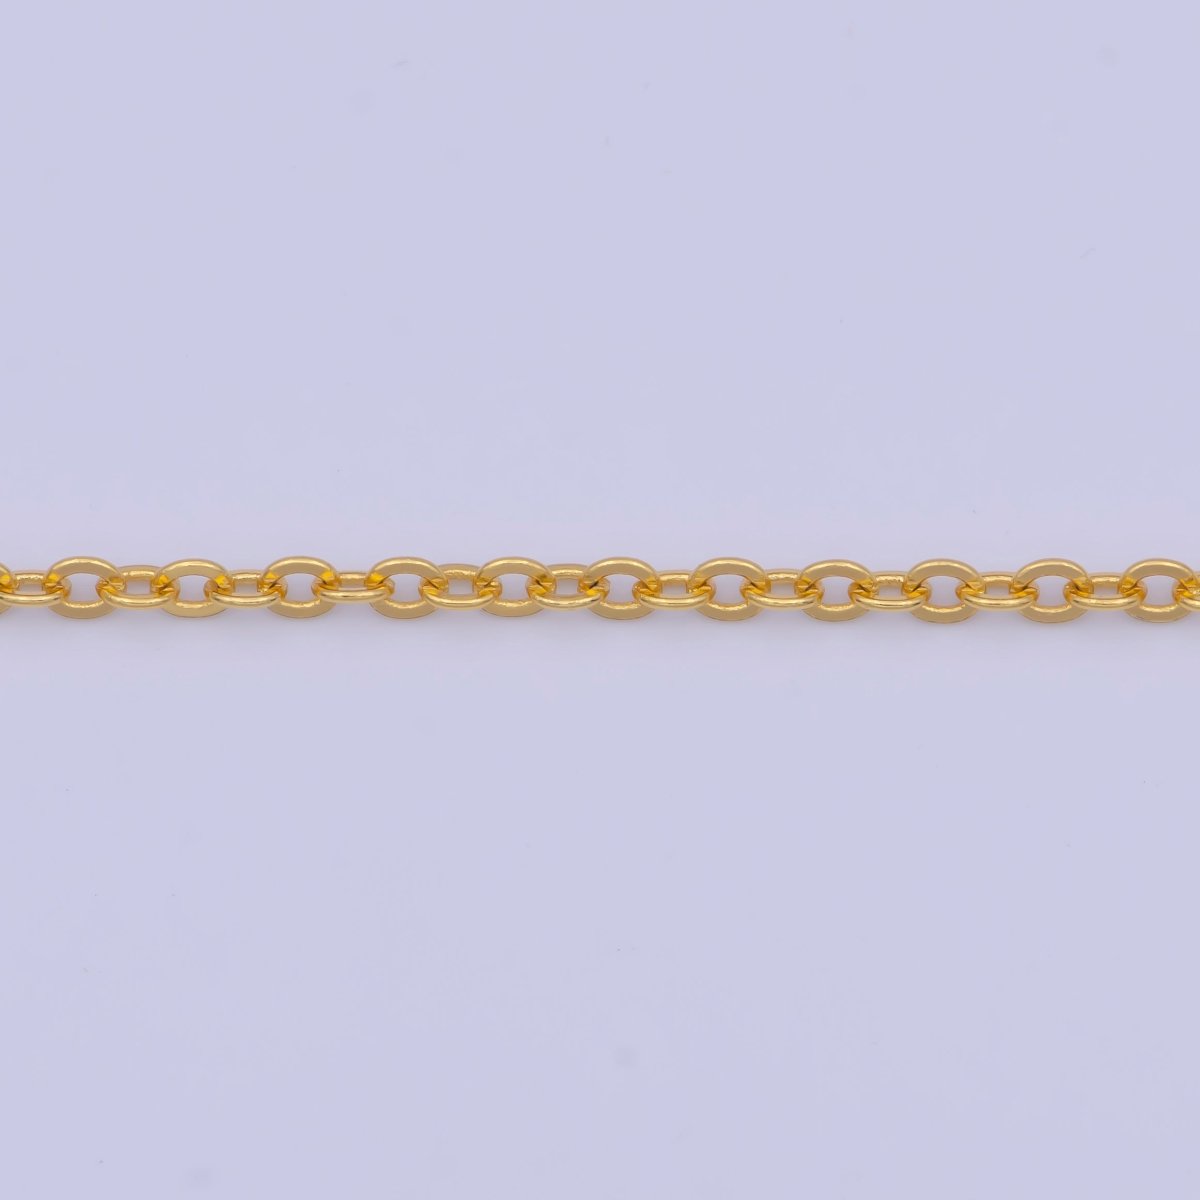 Dainty 24K Gold Filled Cable Chain Necklace Gold Link Chain Necklace Ready to Wear 17.5 Inch | WA-1145 Clearance Pricing - DLUXCA